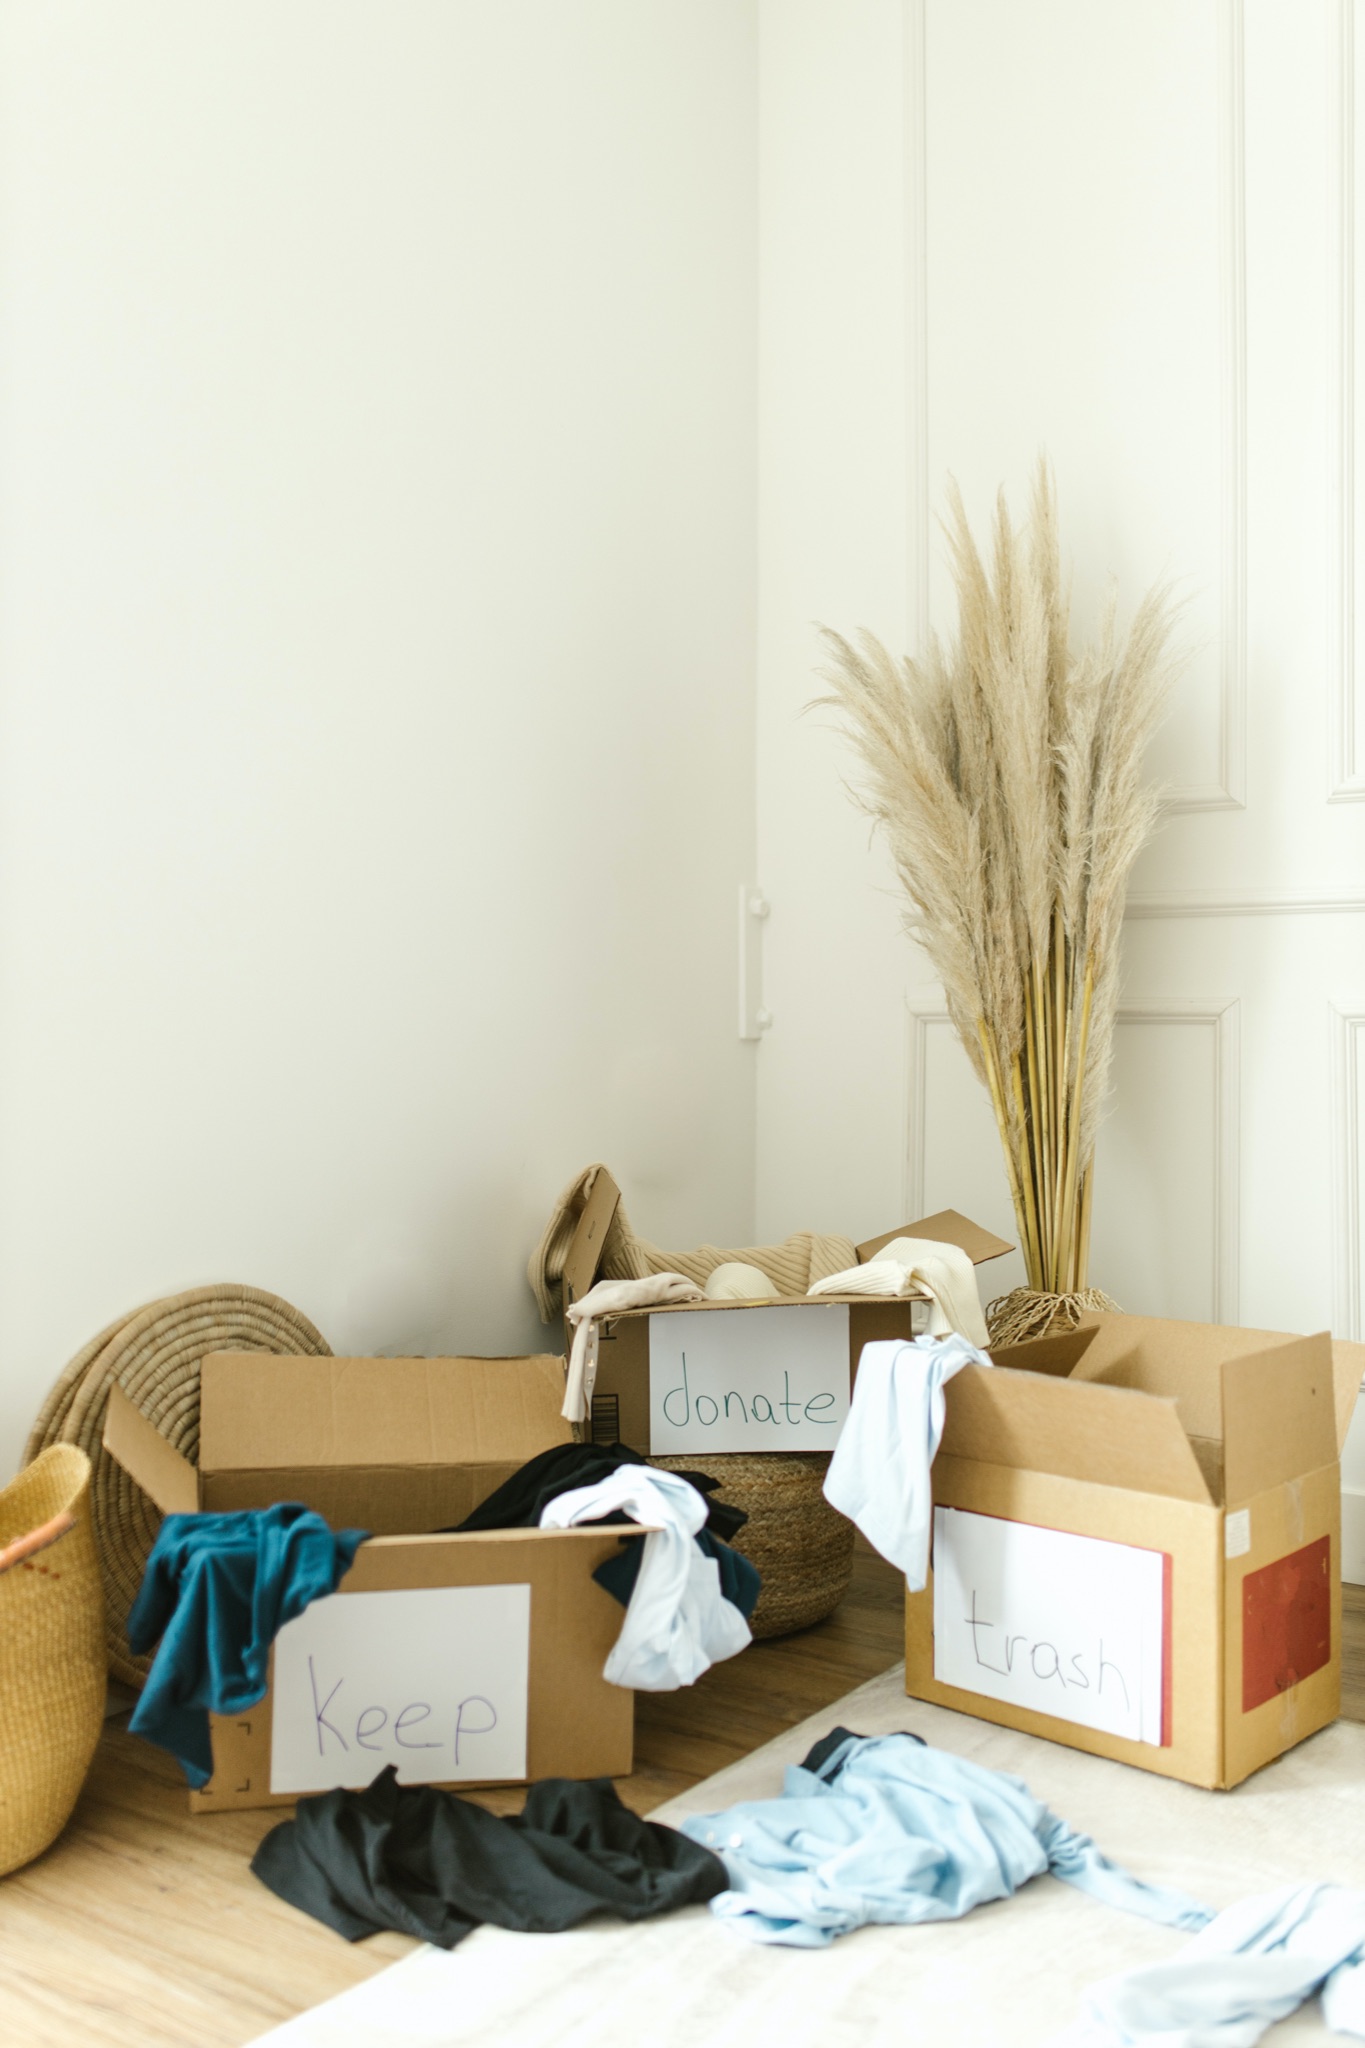 How To Make Your Home Clutter-Free